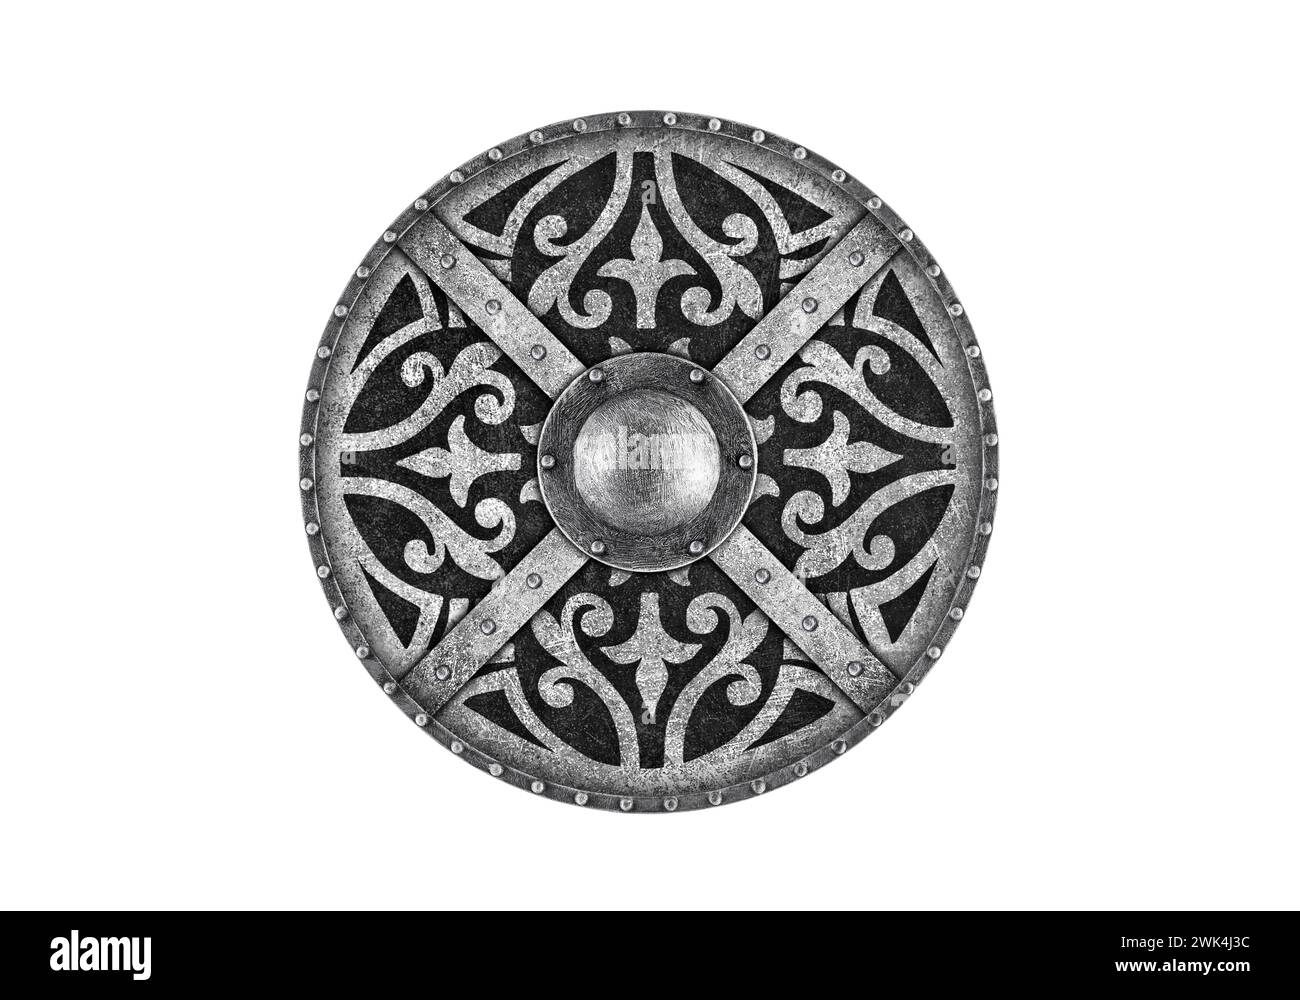 Old decorated metal round shield isolated on white background Stock Photo